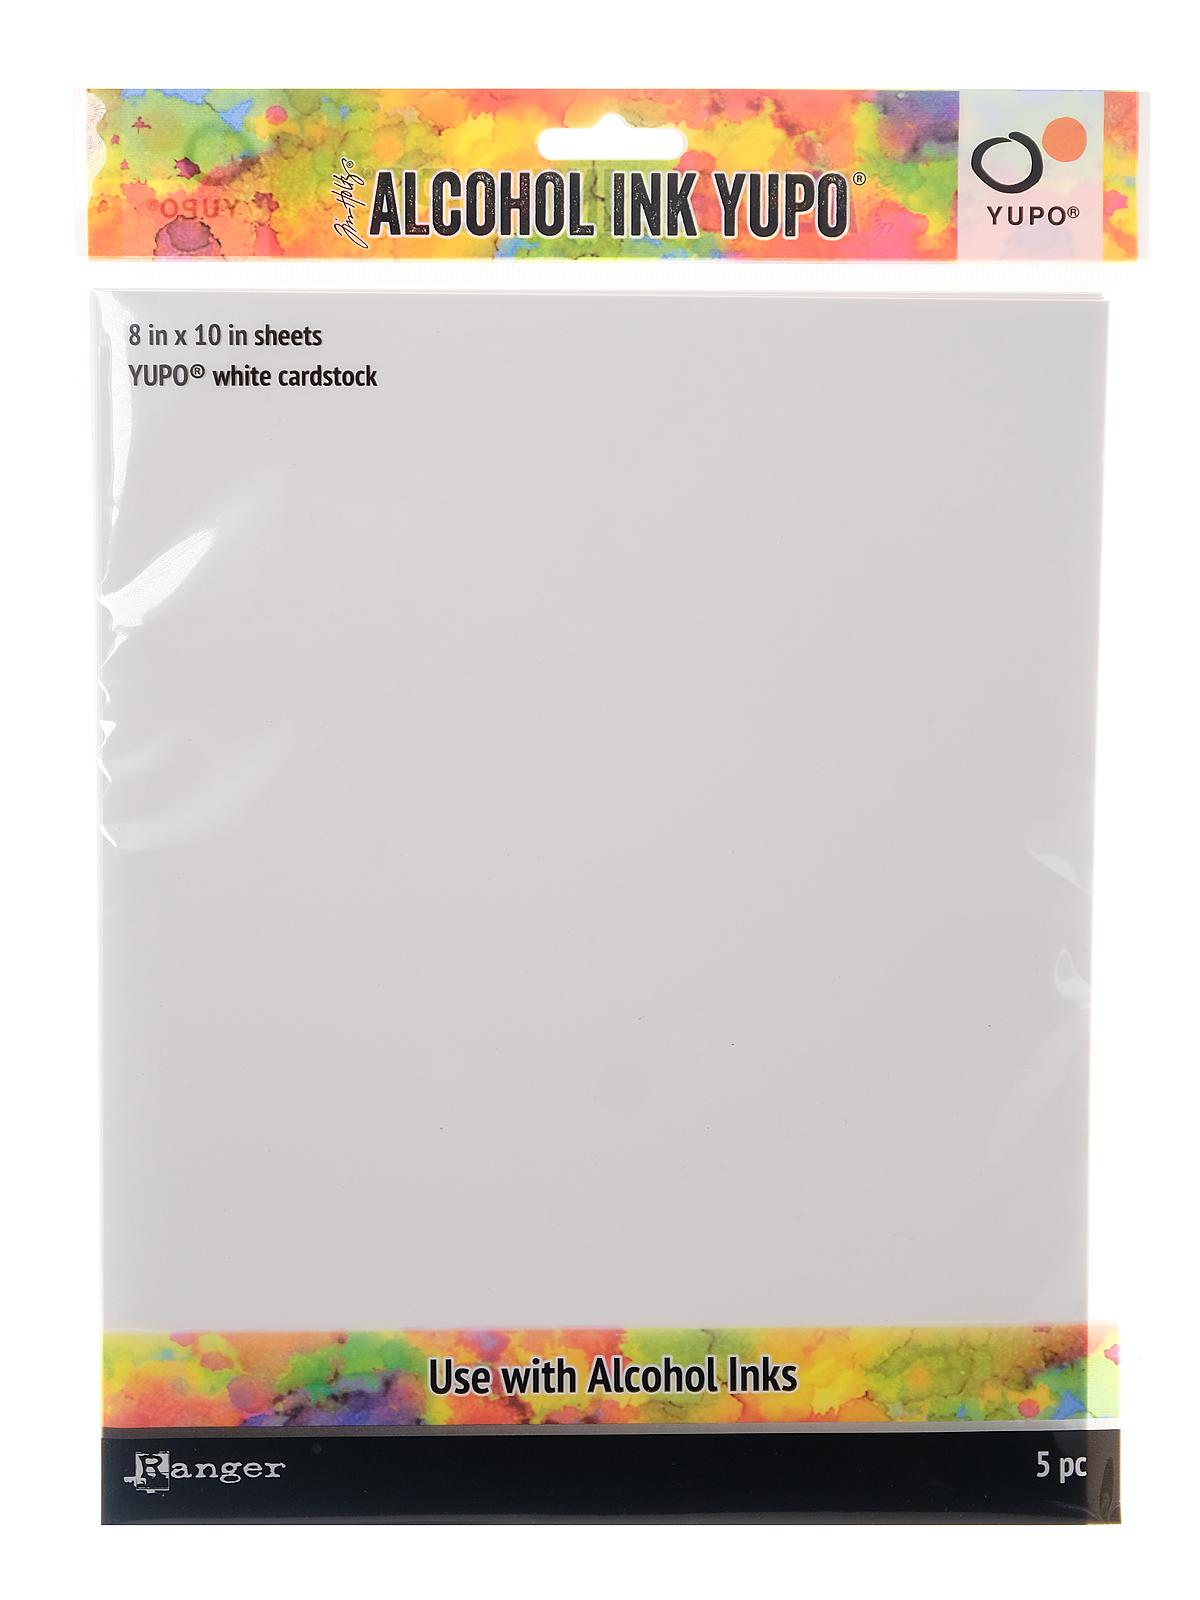 Tim Holtz Alcohol Ink Yupo Paper 8 In. X 10 In., 86 Lb. Pack Of 5 White